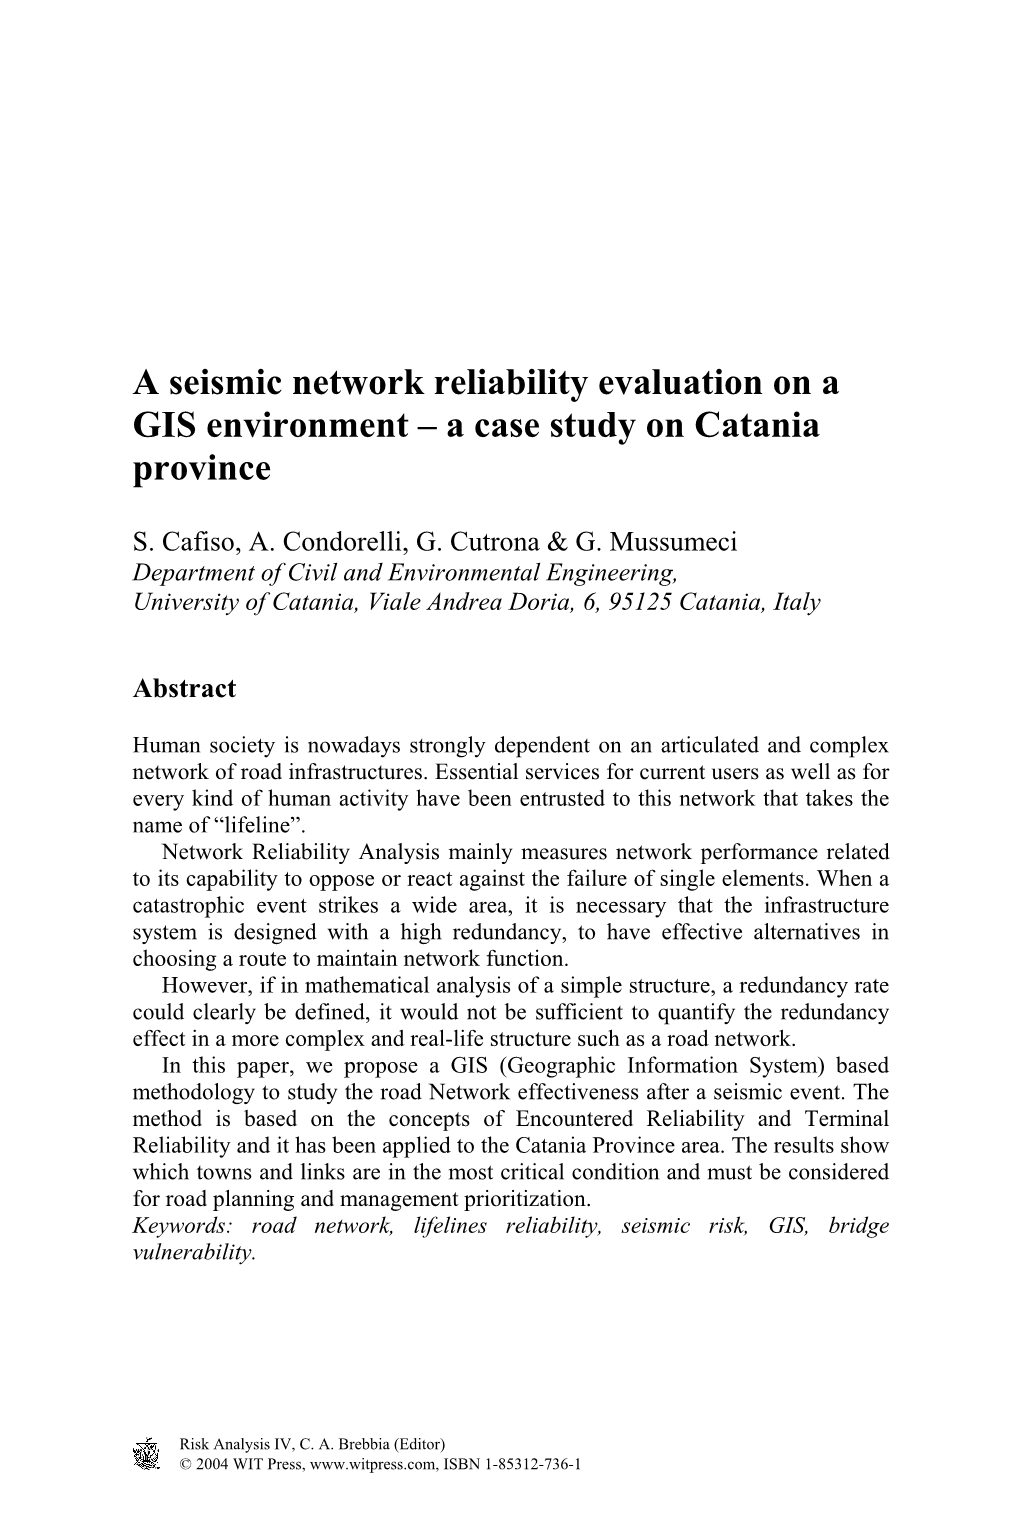 A Seismic Network Reliability Evaluation on a GIS Environment – a Case Study on Catania Province